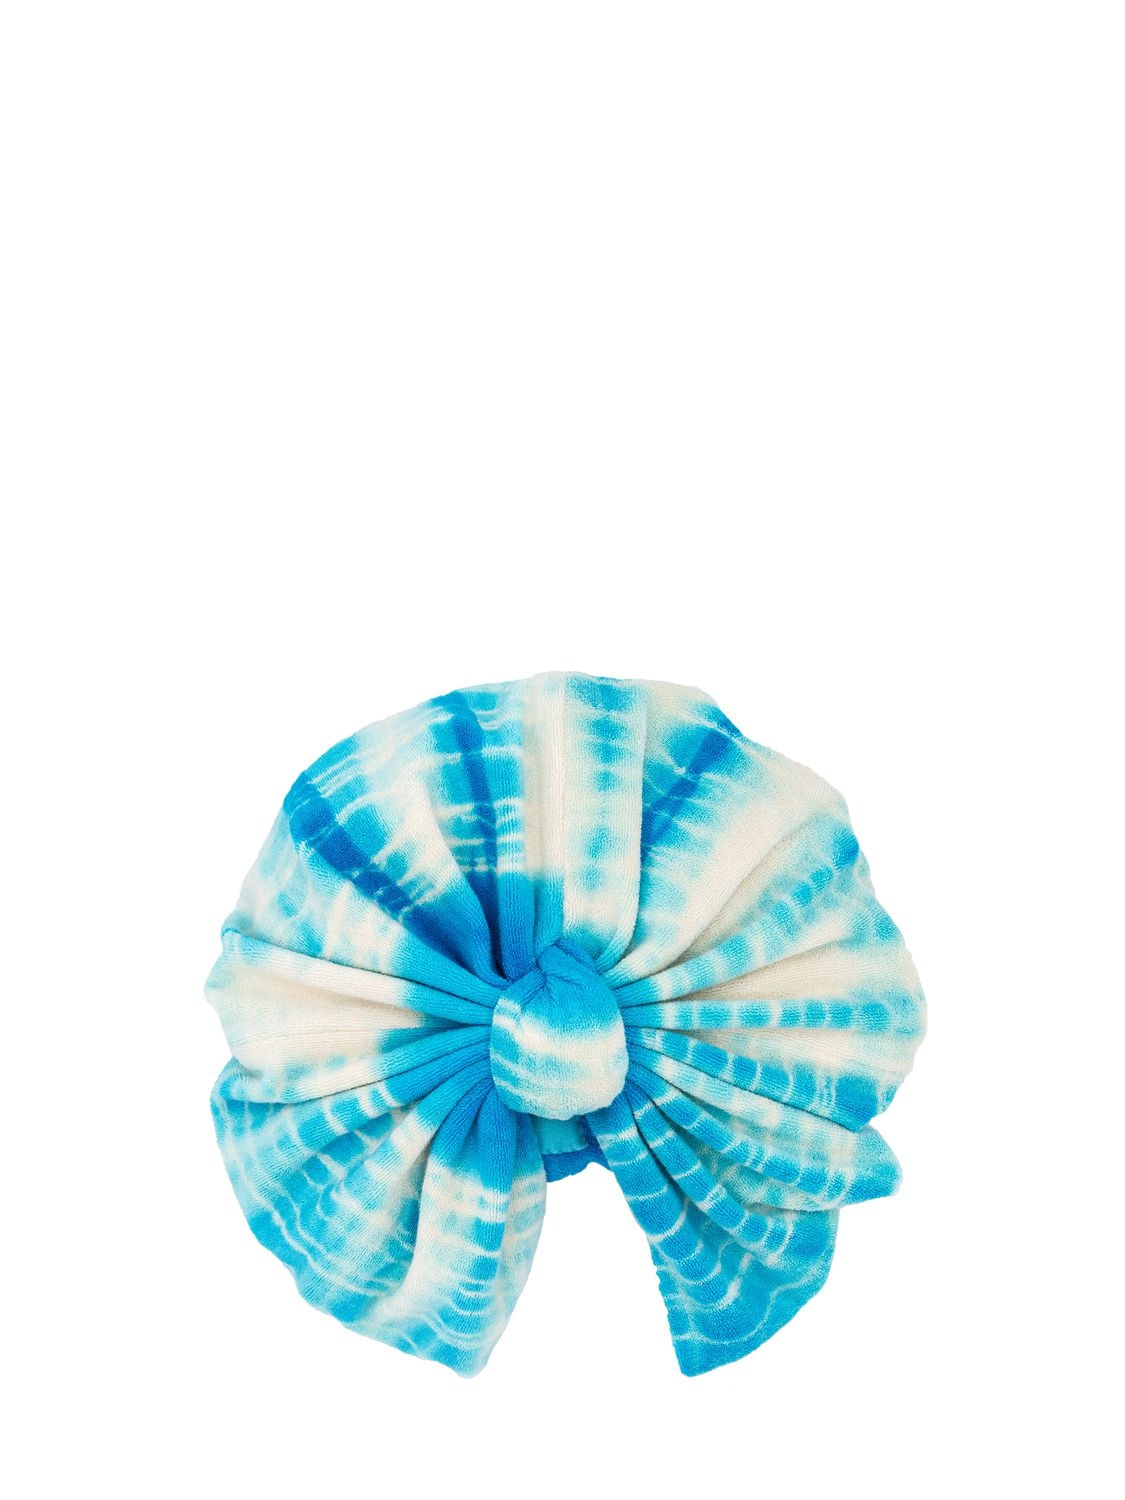 Mary Jane Claverol Biba Knotted Tie Dye Terry Cloth Turban In Blue,white